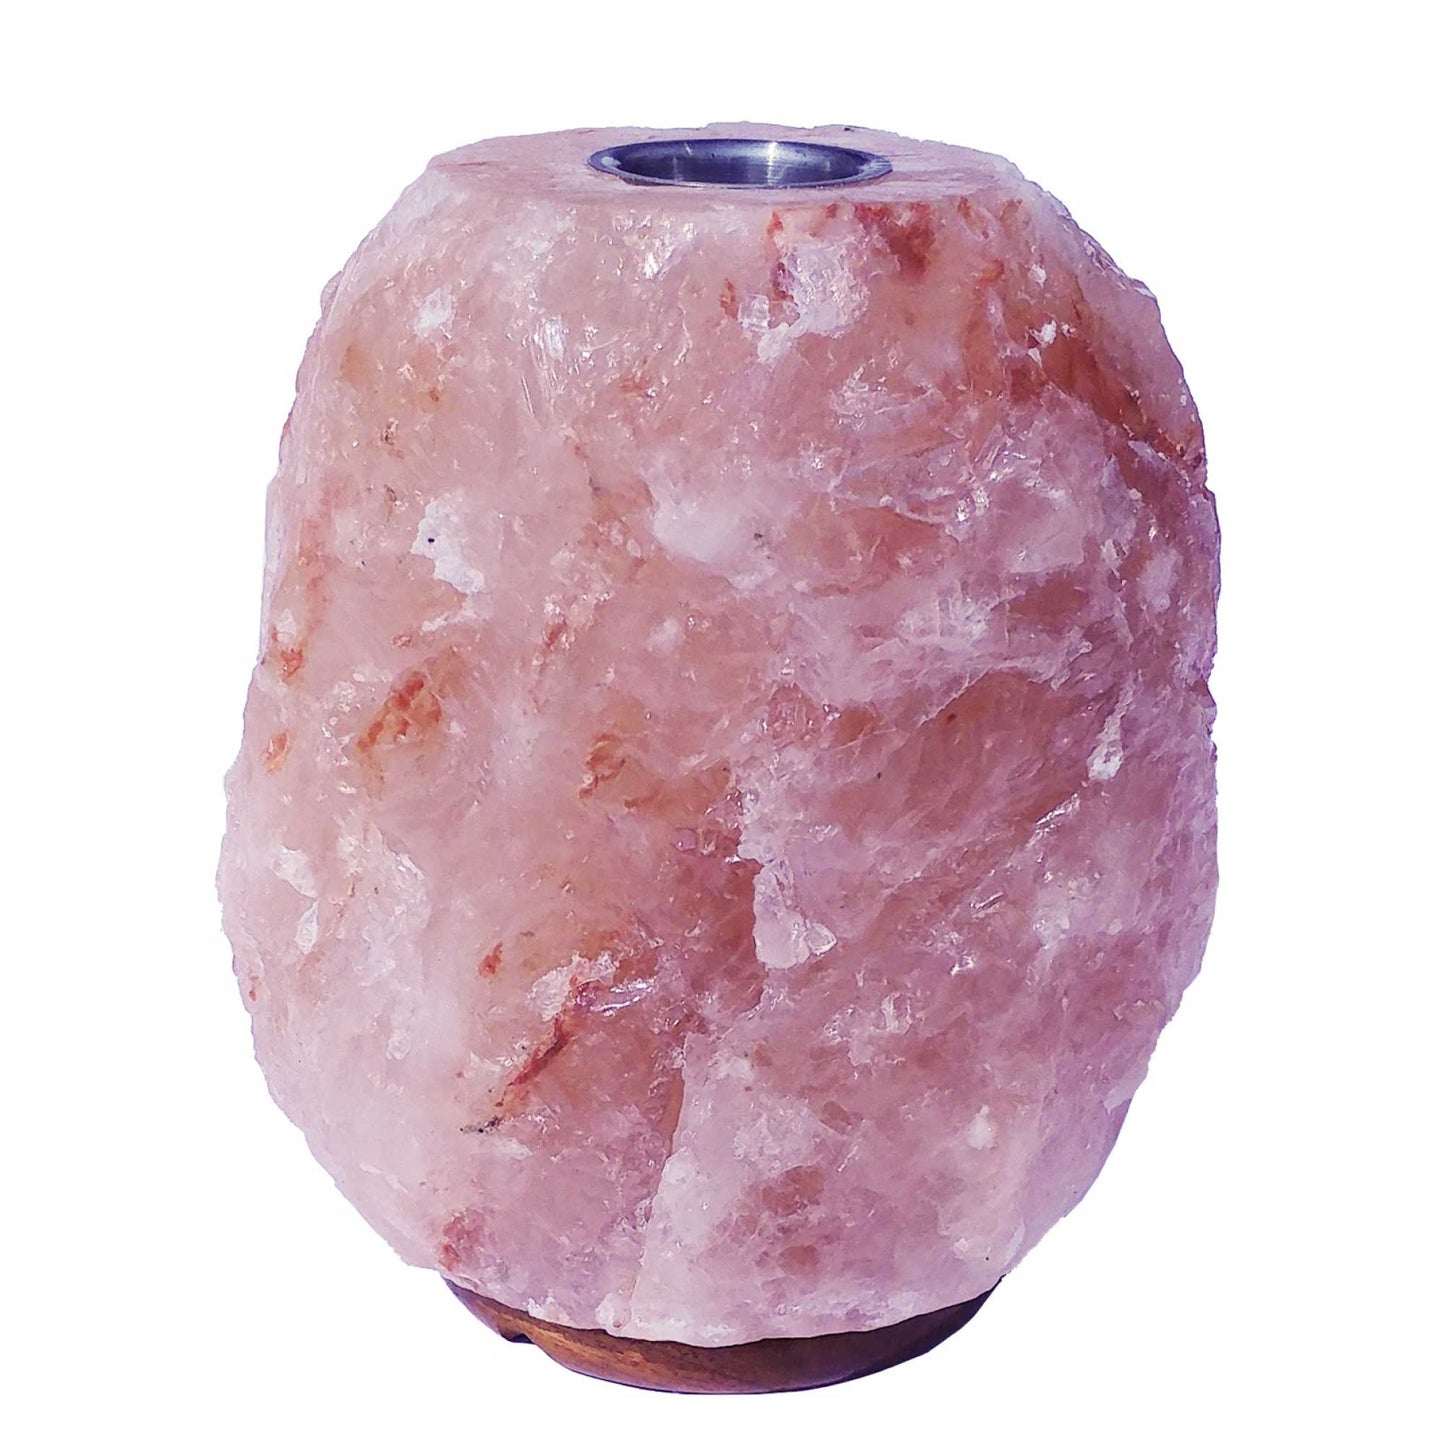 12V 12W 3-5kg Himalayan Pink Salt Diffuser Essential Oil Lamp Aromatherapy On/Off